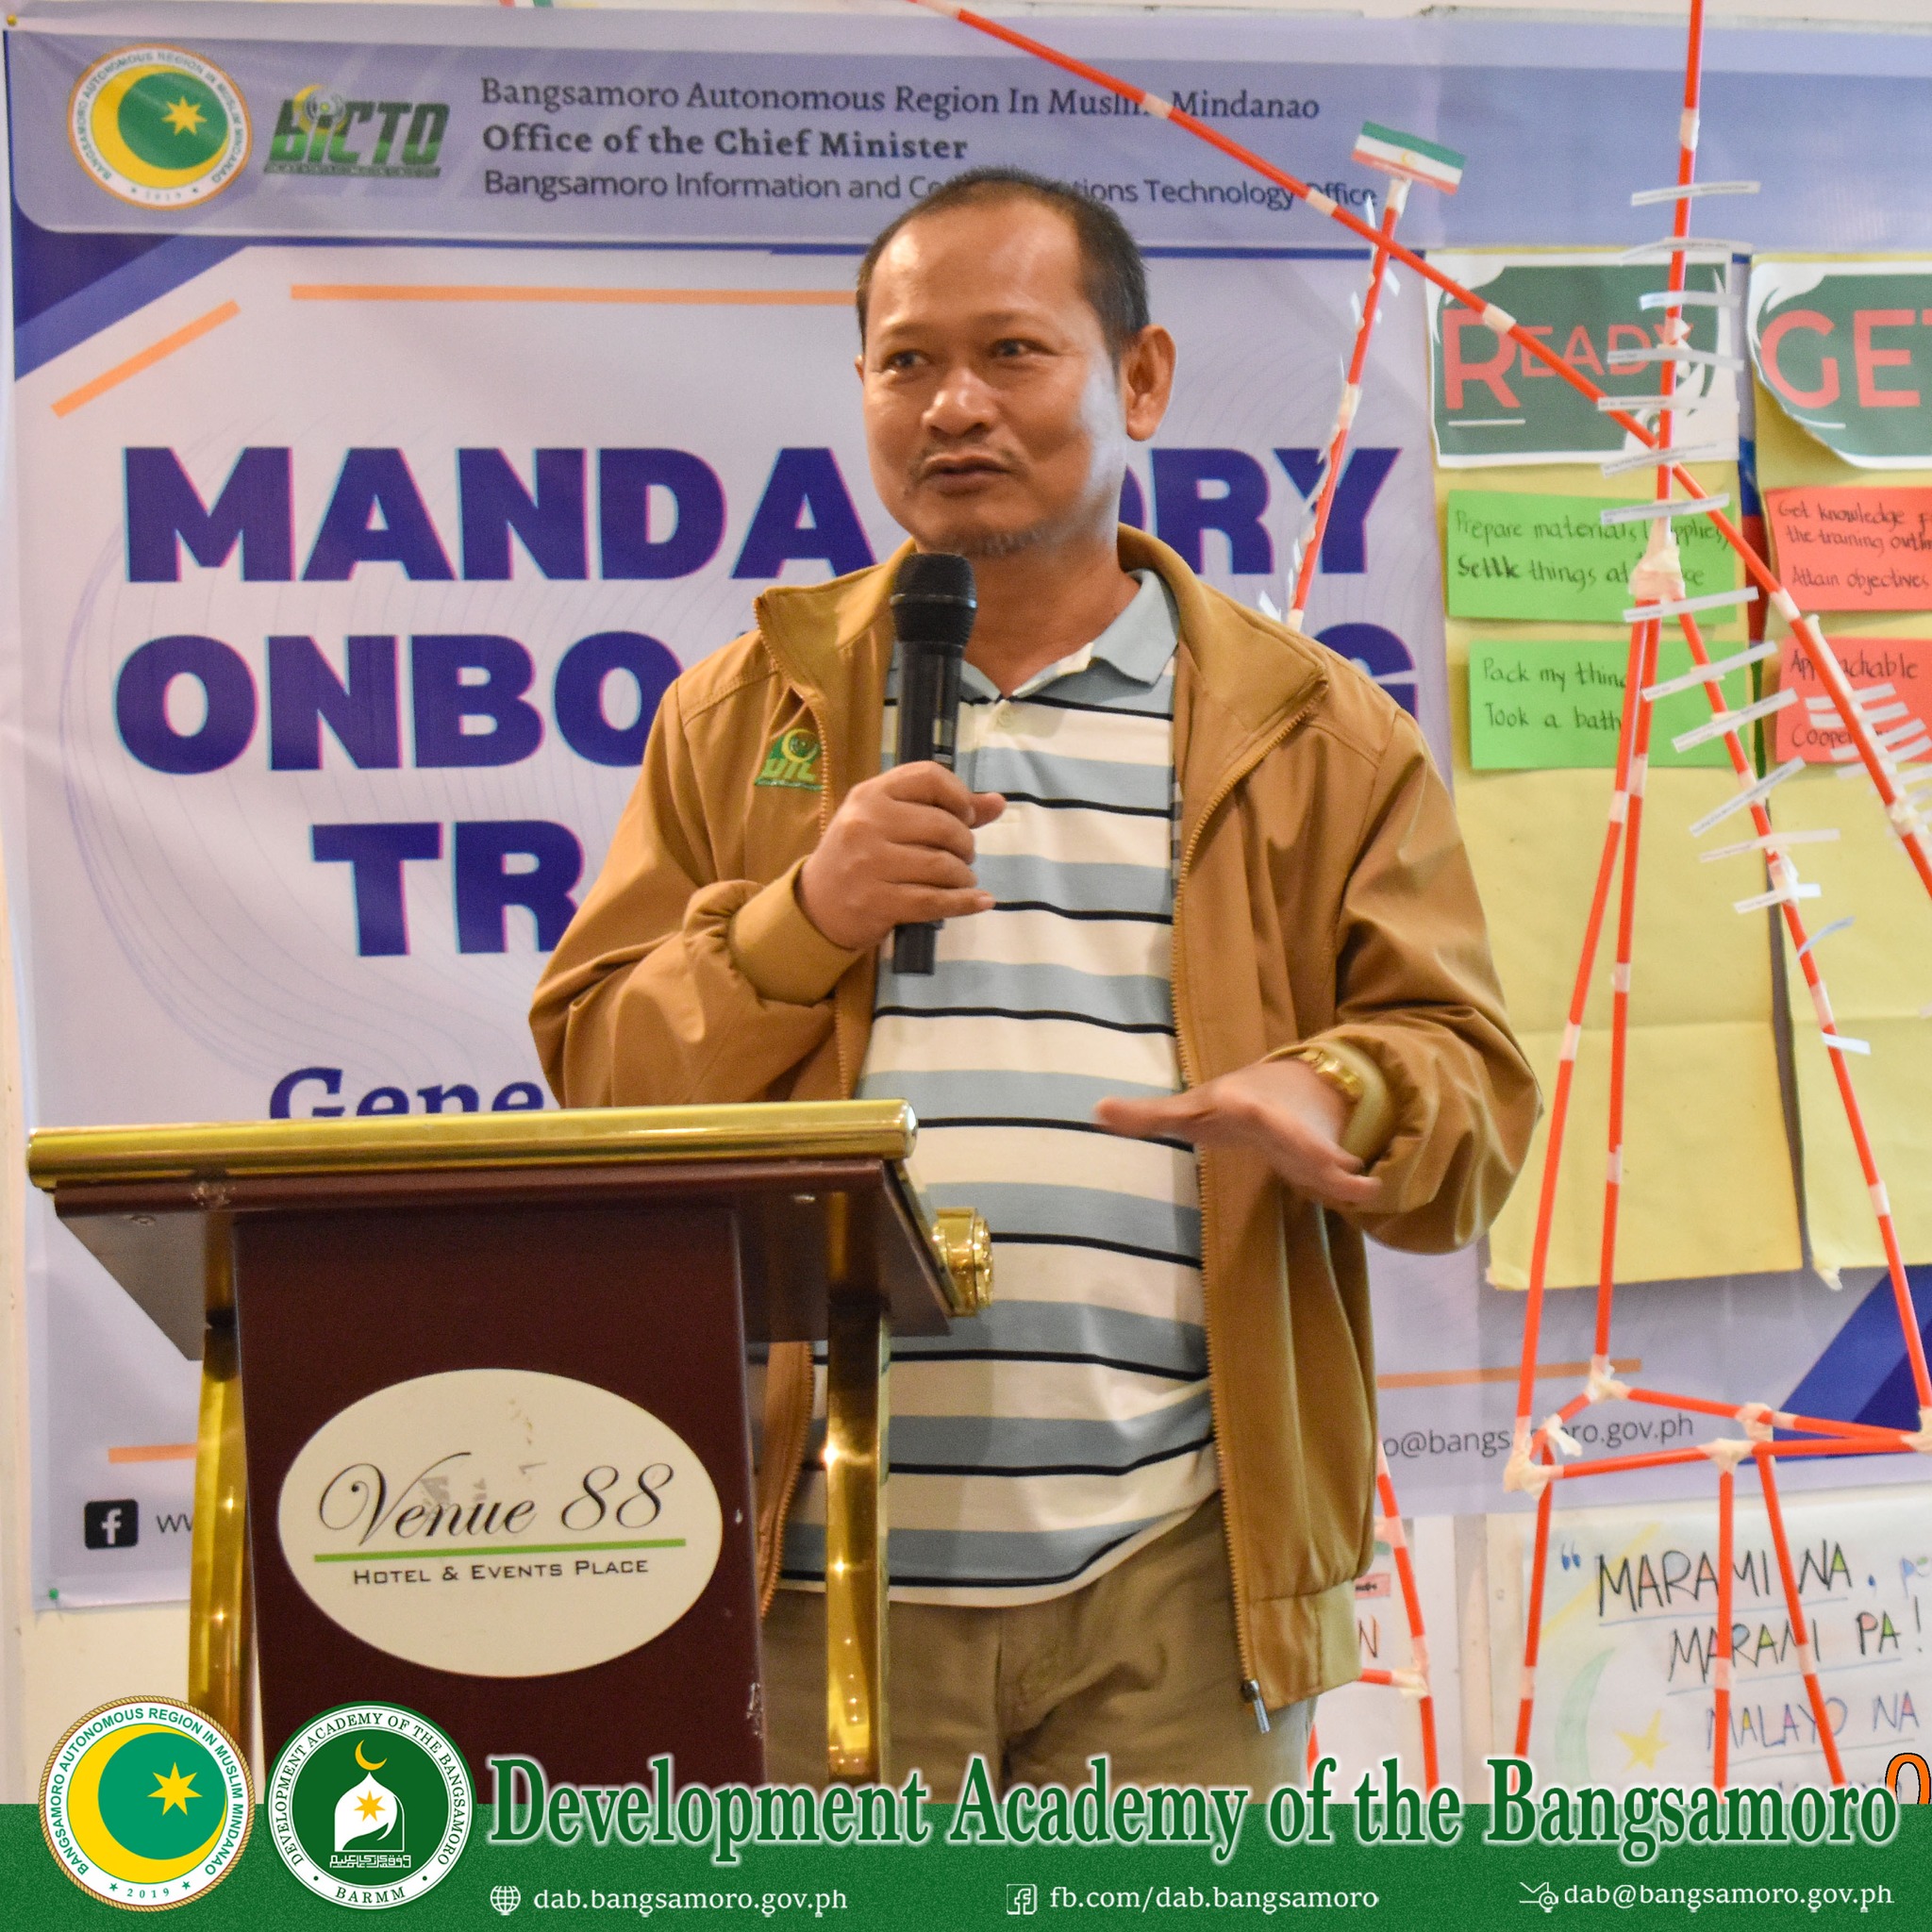 You are currently viewing LOOK: BICTOry for the Bangsamoro Information and Communications Technology Office for completing the Mandatory Onboarding Training.